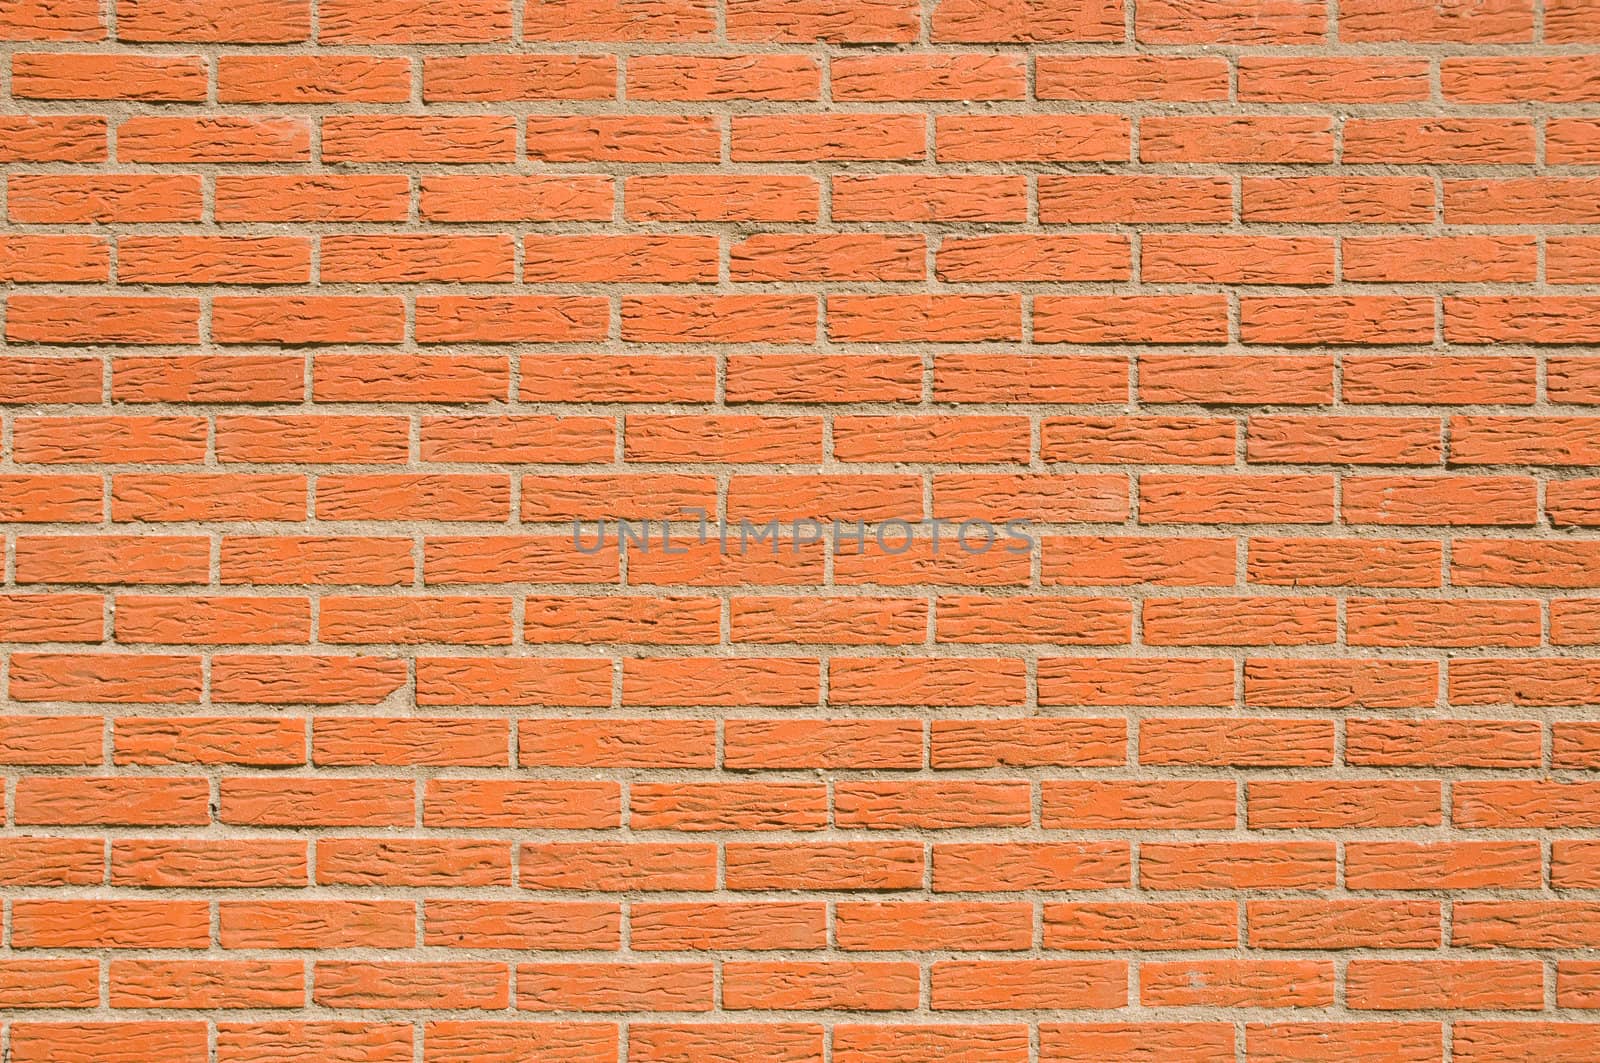 Red brick wall with textured bricks